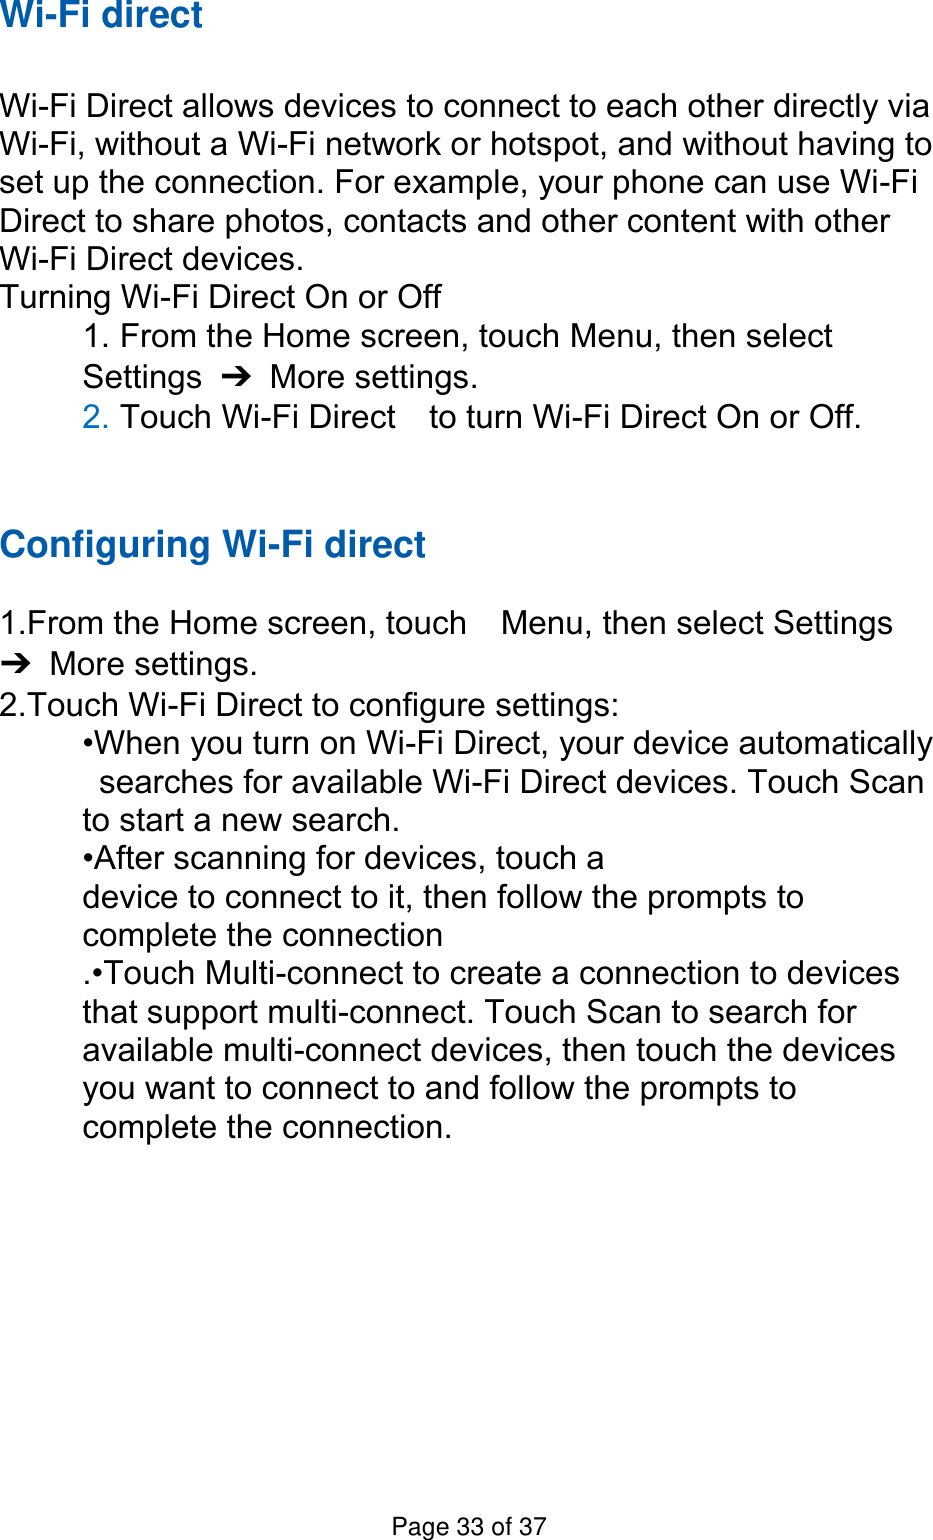 Wi-Fi direct  Wi-Fi Direct allows devices to connect to each other directly via Wi-Fi, without a Wi-Fi network or hotspot, and without having to set up the connection. For example, your phone can use Wi-Fi Direct to share photos, contacts and other content with other Wi-Fi Direct devices.   Turning Wi-Fi Direct On or Off 1. From the Home screen, touch Menu, then select   Settings  ➔  More settings. 2. Touch Wi-Fi Direct    to turn Wi-Fi Direct On or Off.   Configuring Wi-Fi direct    1.From the Home screen, touch    Menu, then select Settings ➔  More settings. 2.Touch Wi-Fi Direct to configure settings:   •When you turn on Wi-Fi Direct, your device automatically   searches for available Wi-Fi Direct devices. Touch Scan   to start a new search. •After scanning for devices, touch a   device to connect to it, then follow the prompts to   complete the connection .•Touch Multi-connect to create a connection to devices that support multi-connect. Touch Scan to search for available multi-connect devices, then touch the devices you want to connect to and follow the prompts to complete the connection.   Page 33 of 37